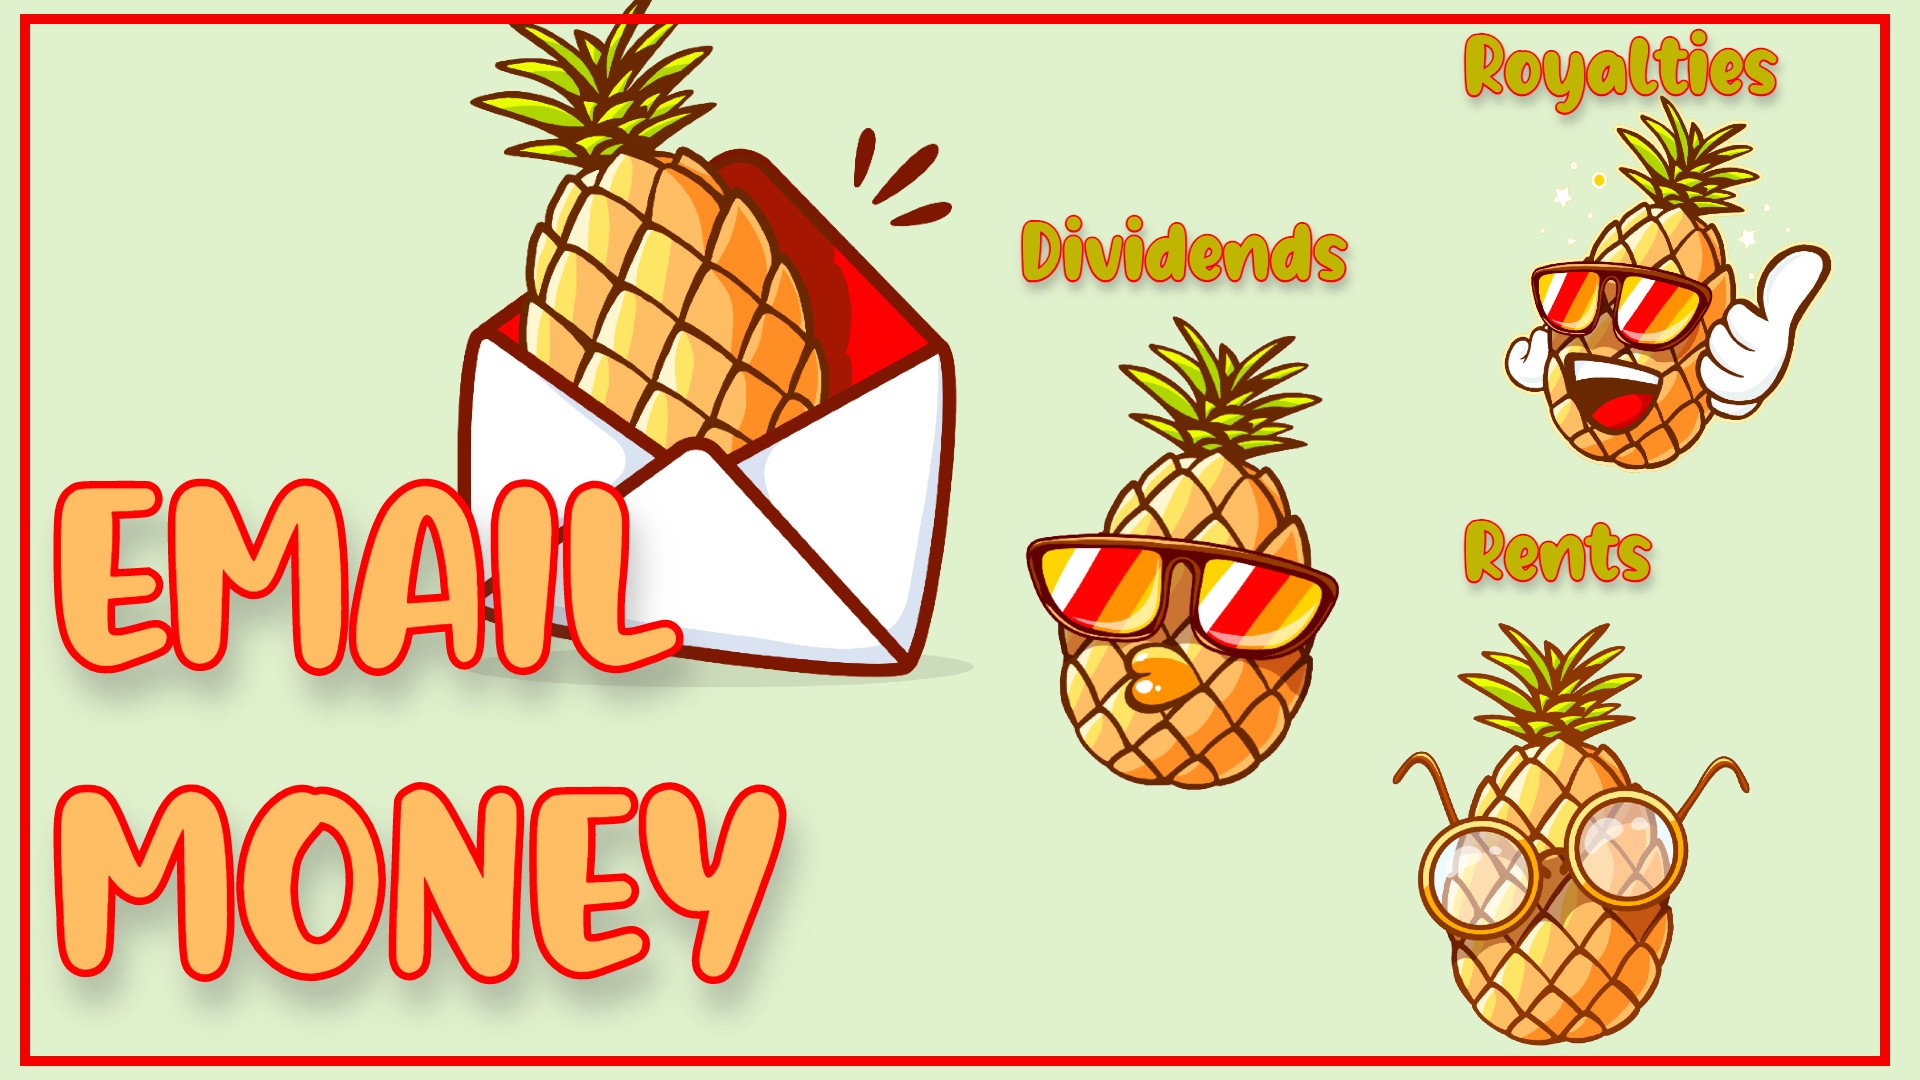 Email Money: Dividends, Rents, & Royalties for the Modern Day